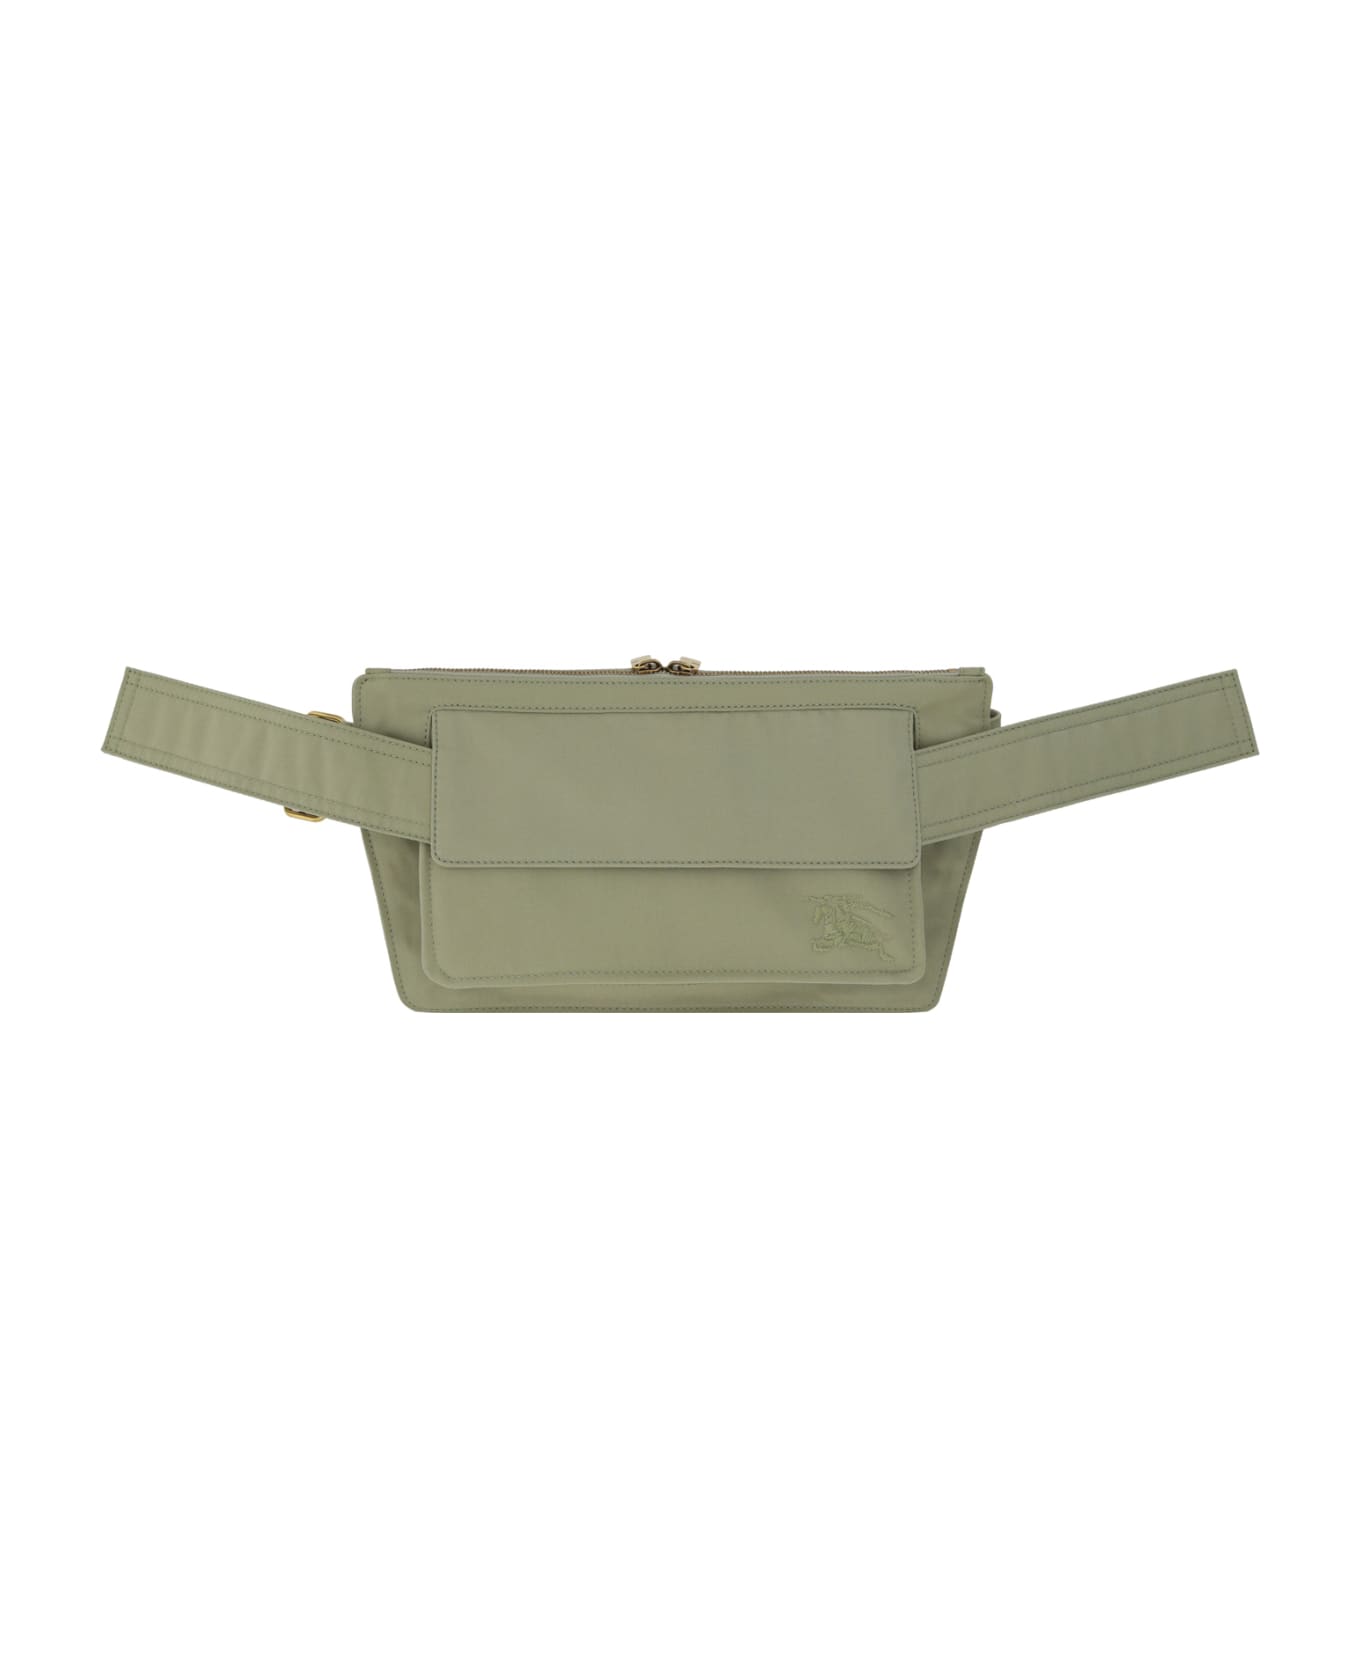 Burberry Trench Fanny Pack - Hunter ベルトバッグ